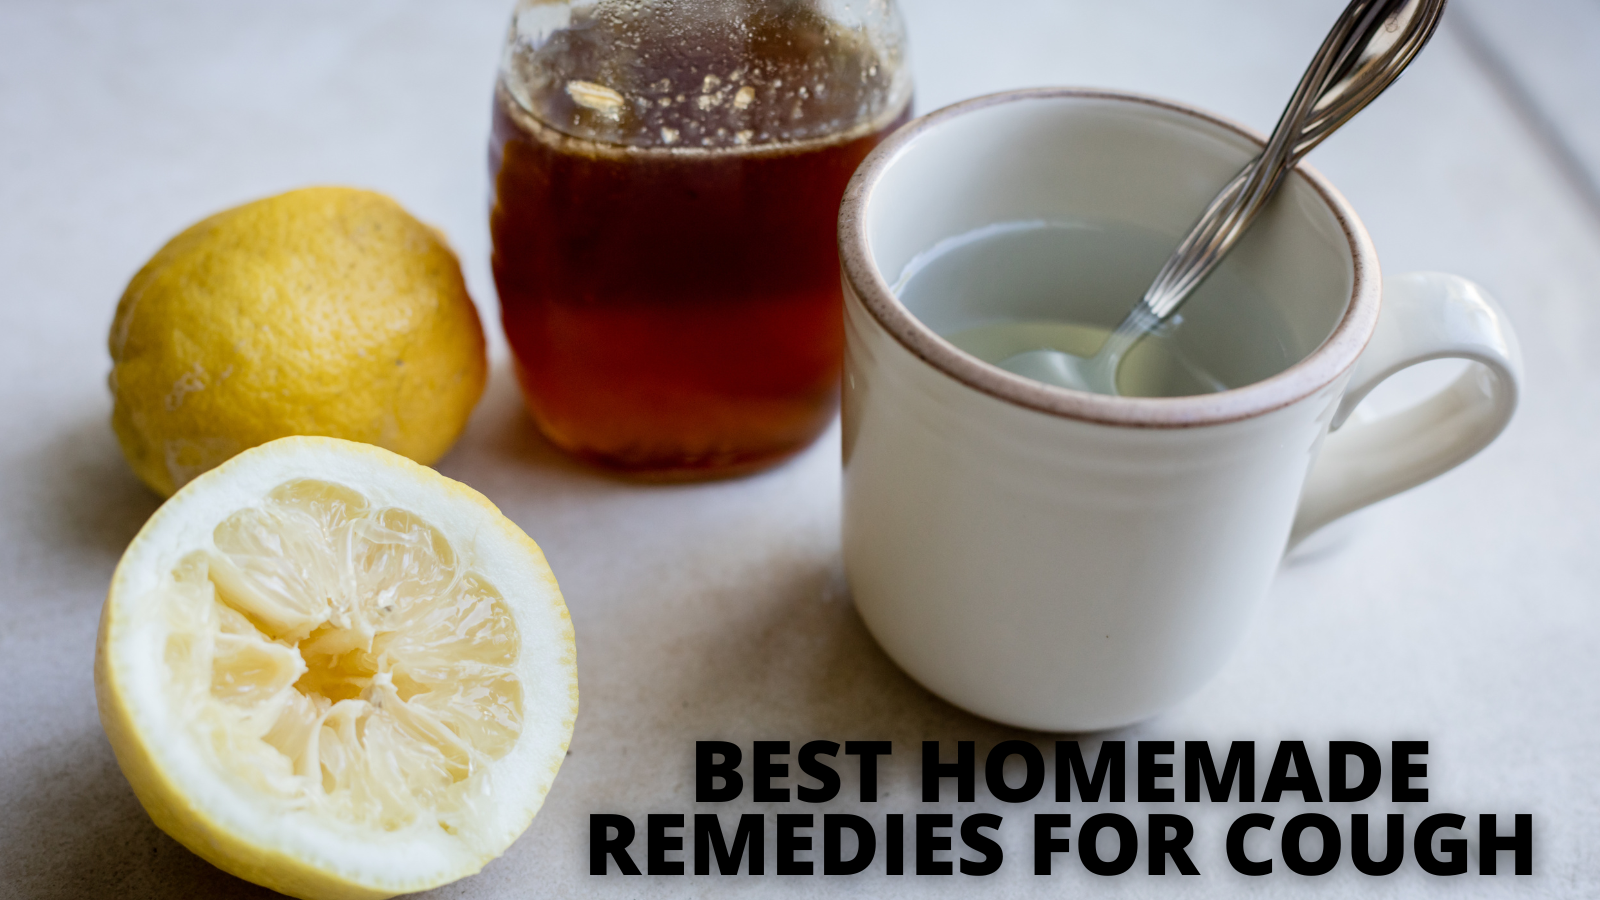 Best Homemade Remedies For Cough